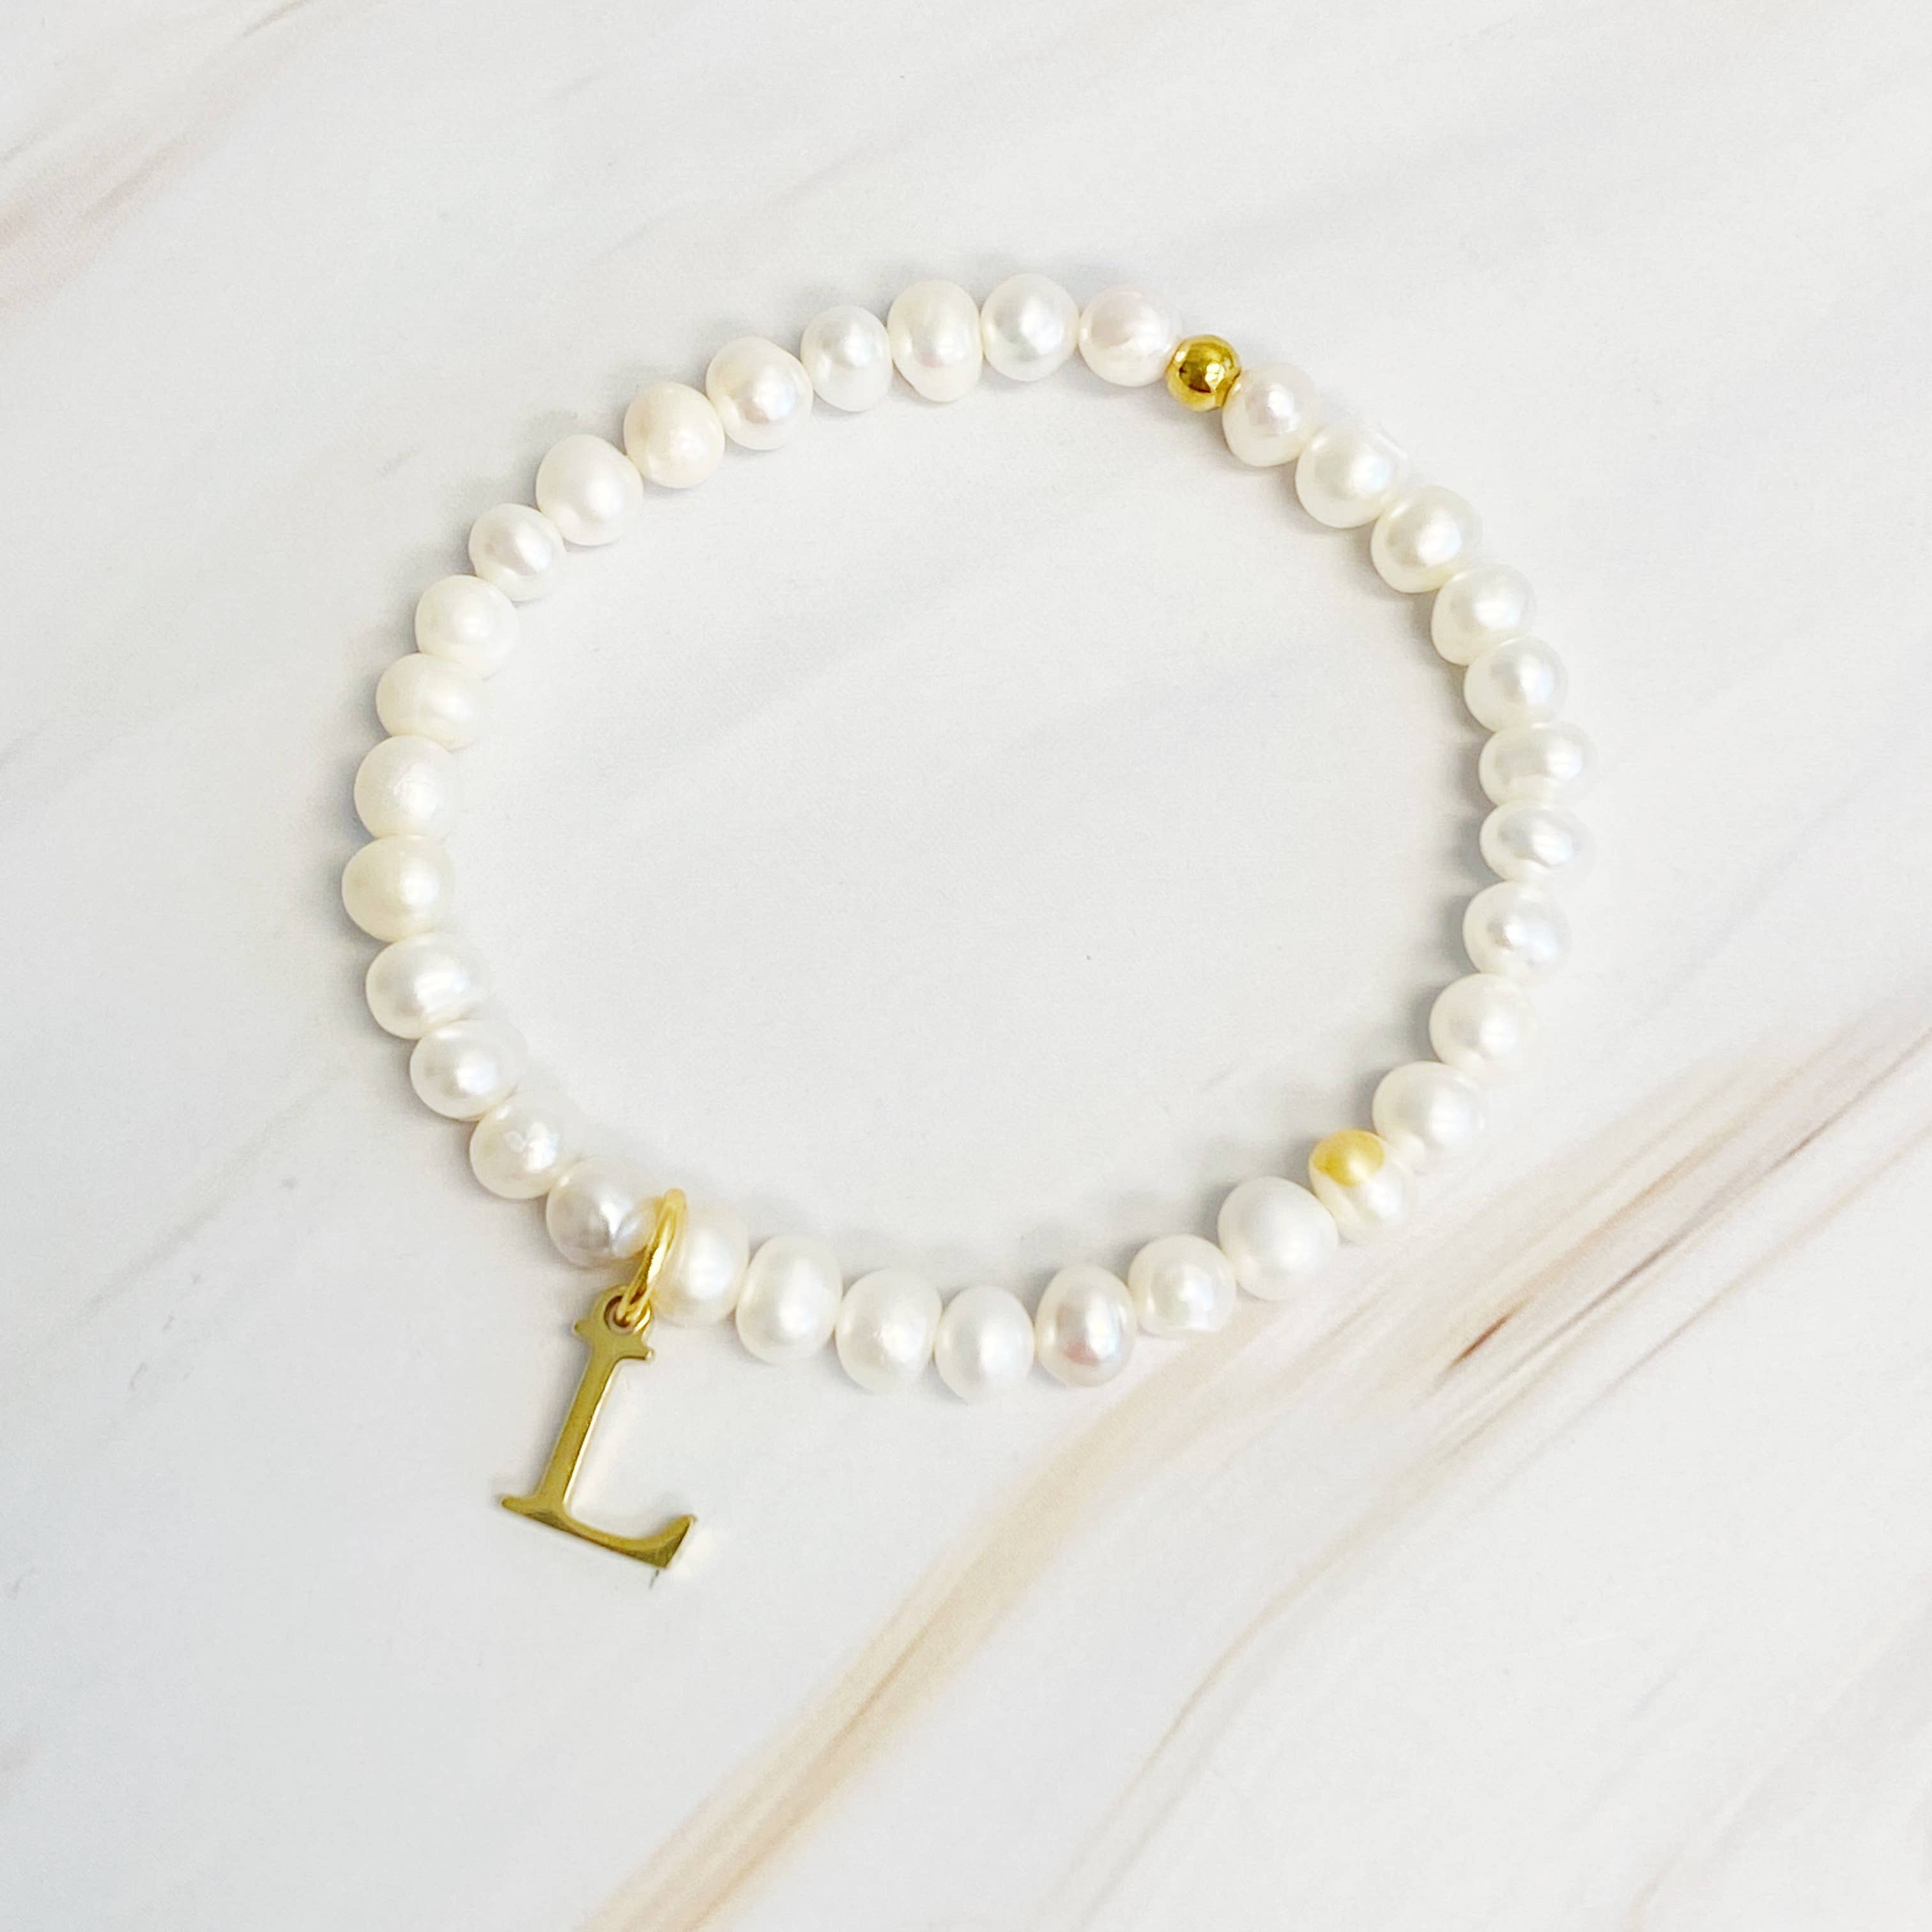 Freshwater Pearl Initial Charm Bracelet: A